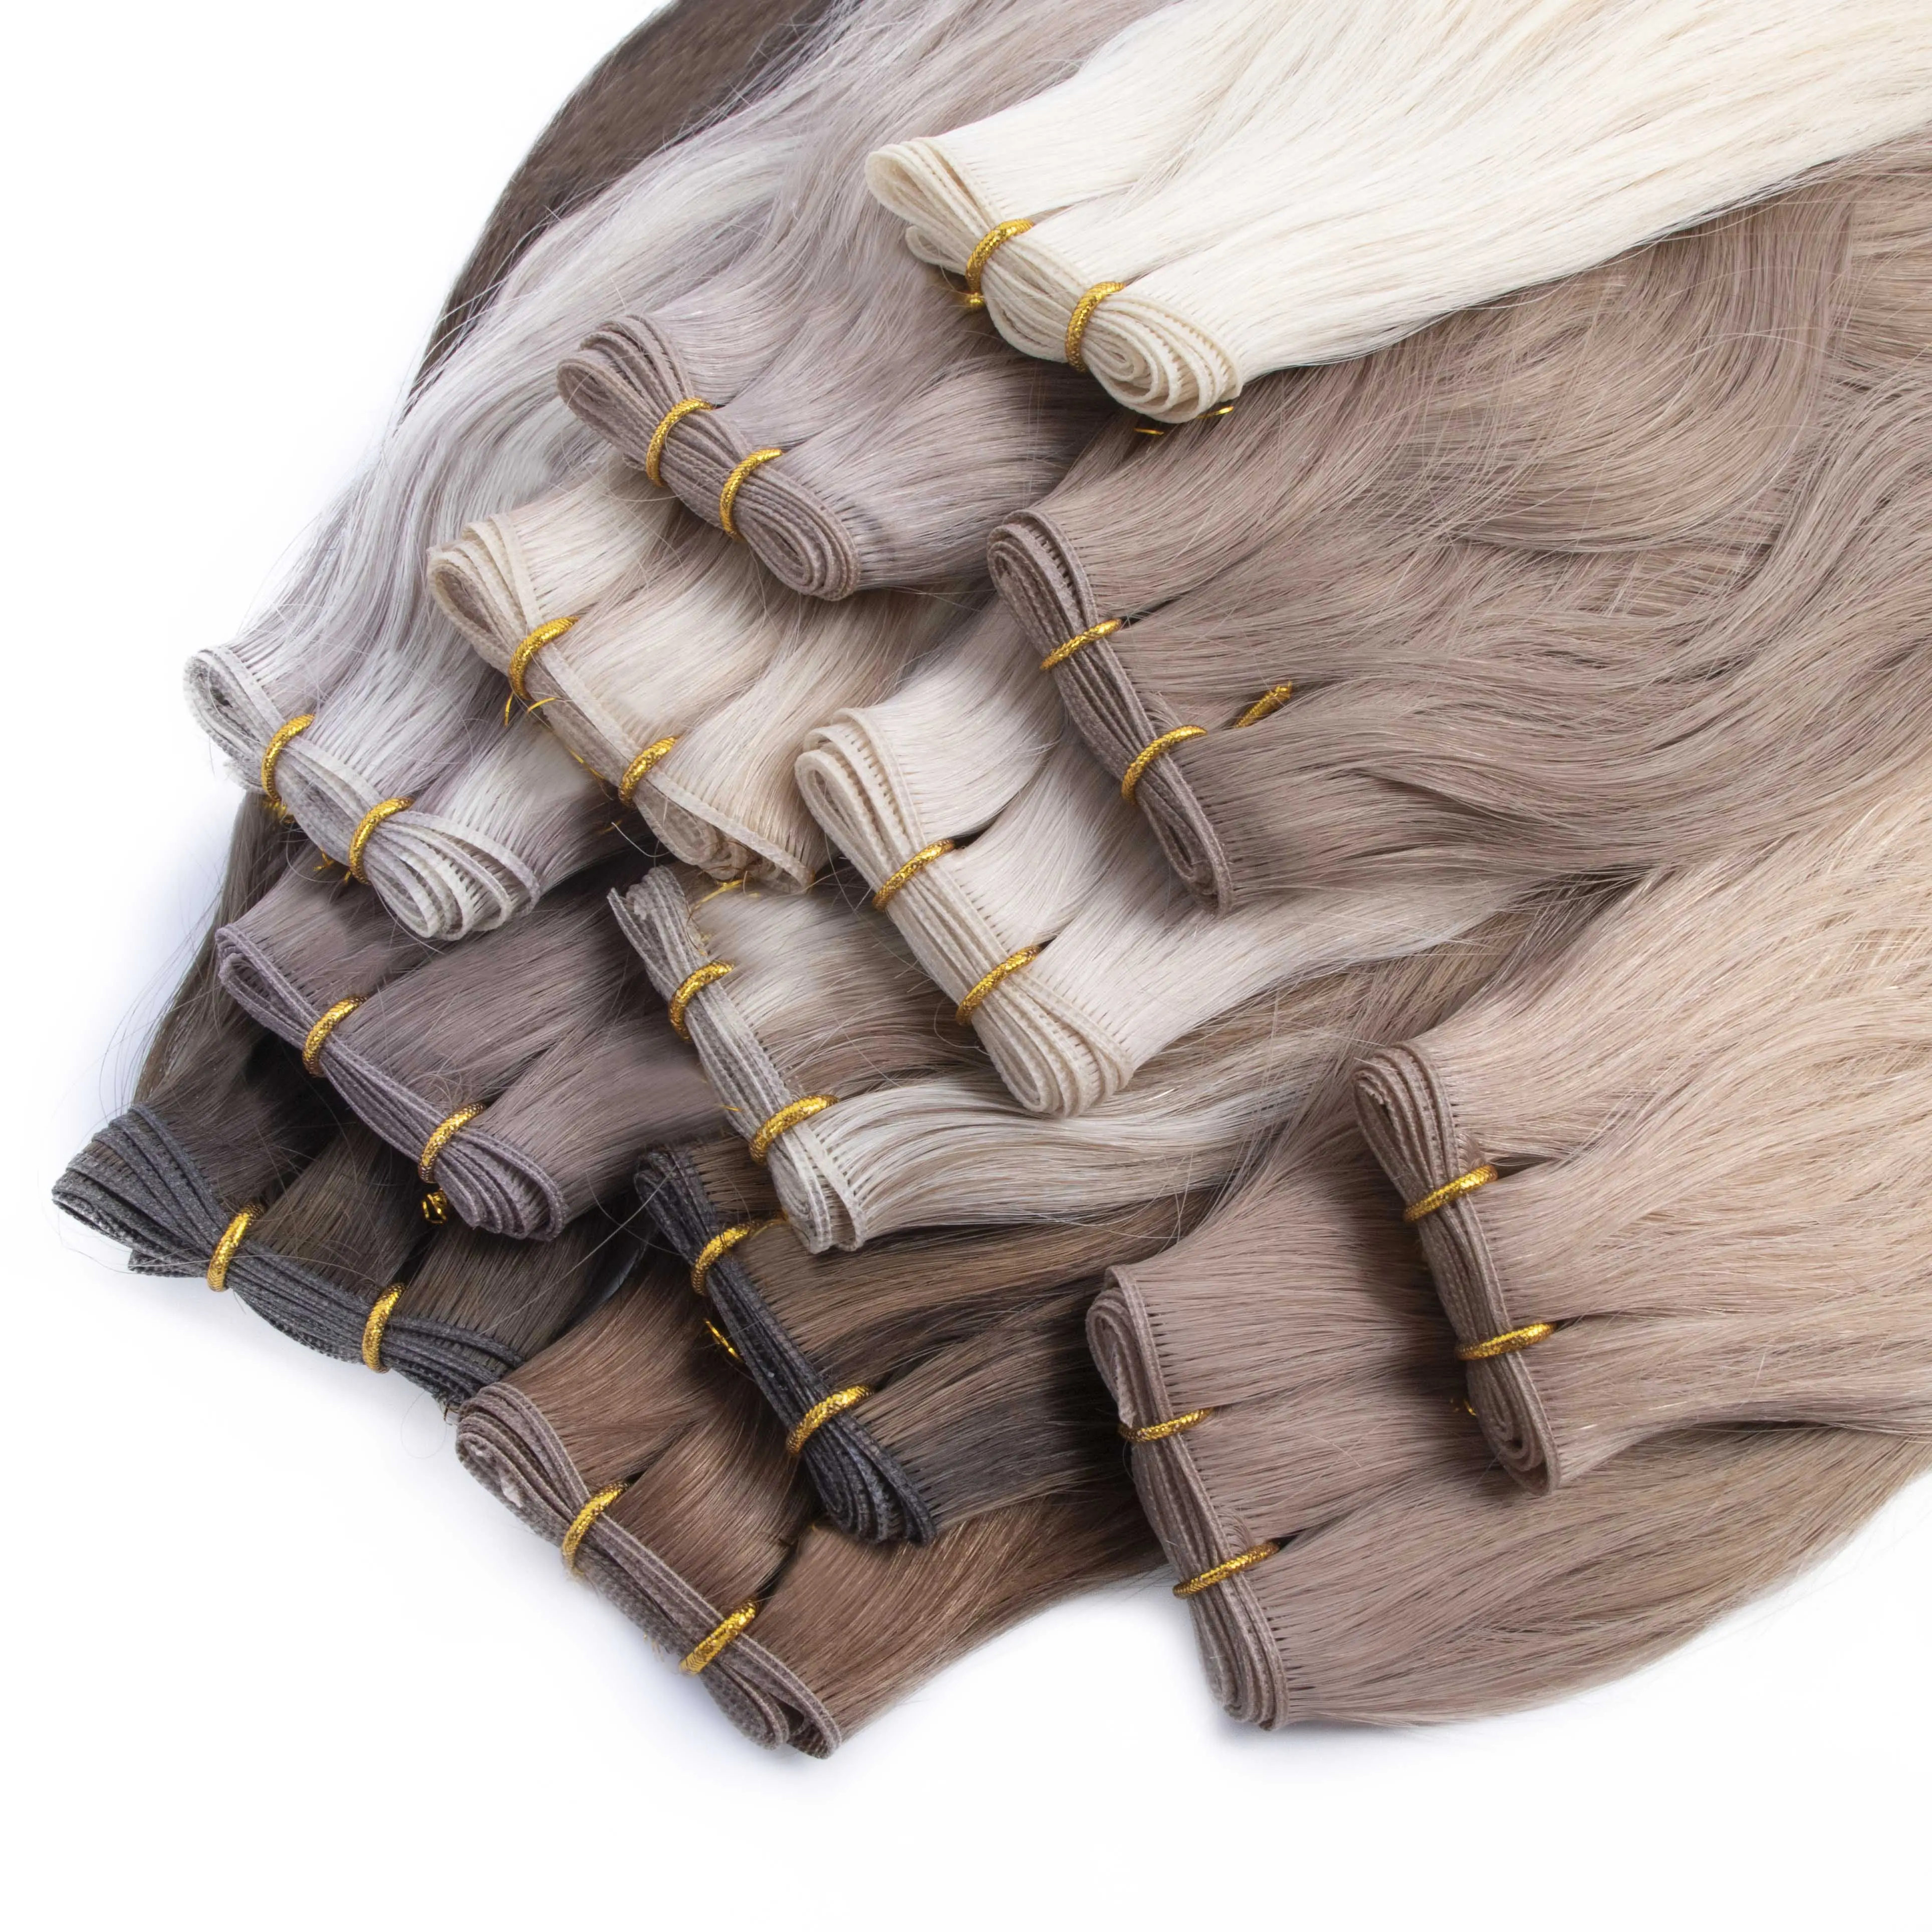 HonorHair Exclusive Salon Supplier Invisible Genius Weft 100% Virgin Russian Human Hair Extension cuticle aligned